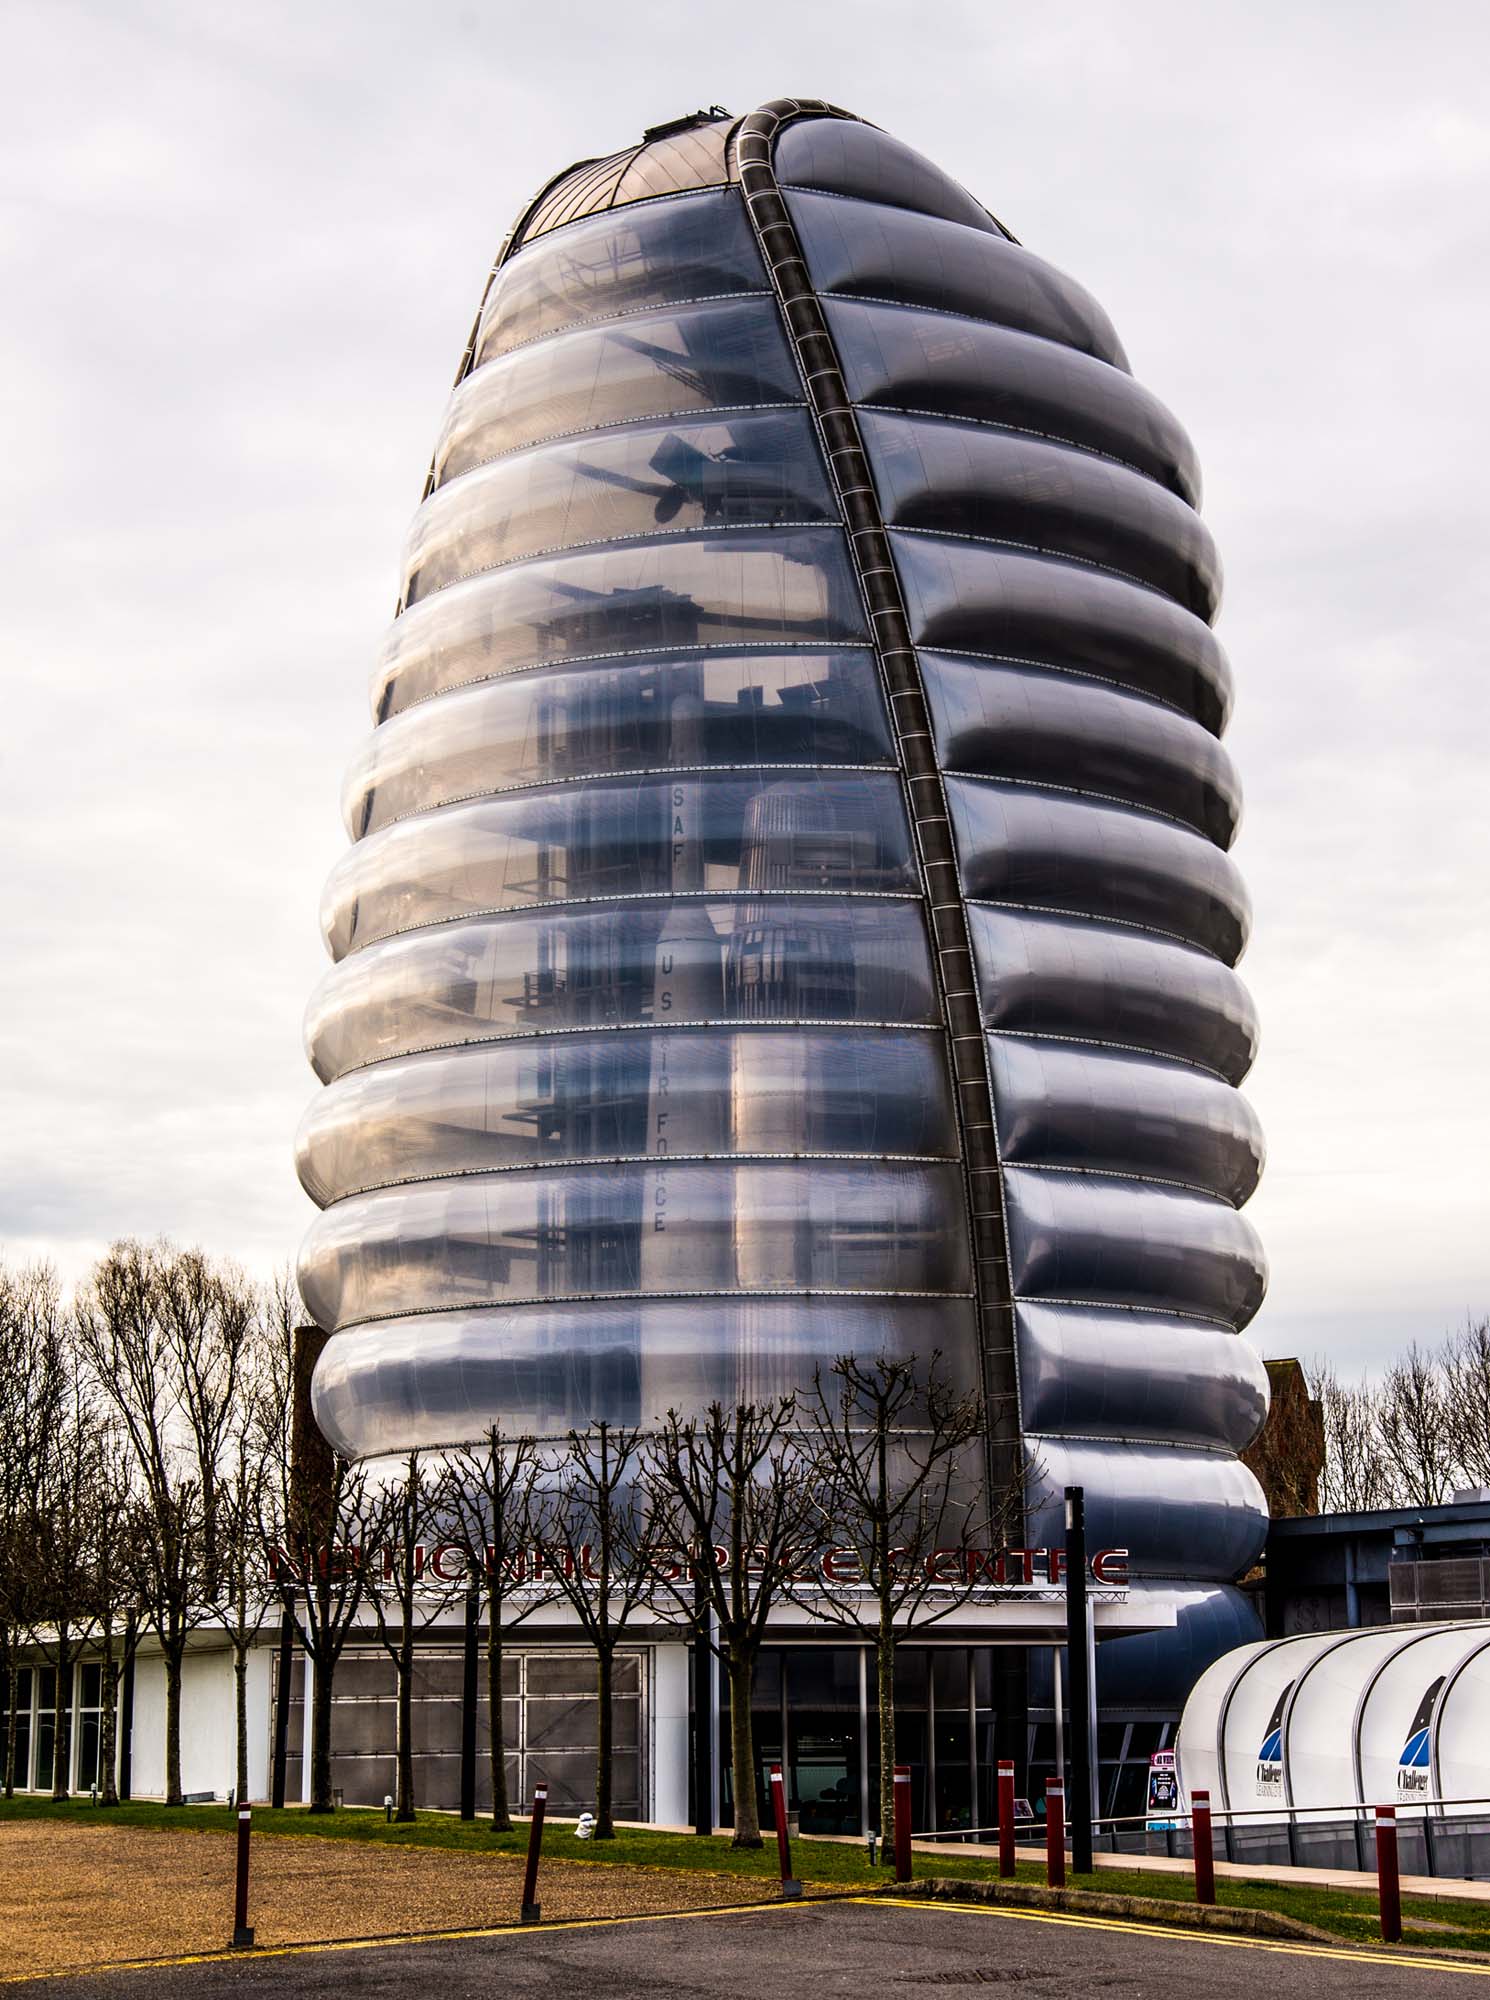 The magnificent rocket house at the National Space Centre, designed by Nicholas Grimshaw -